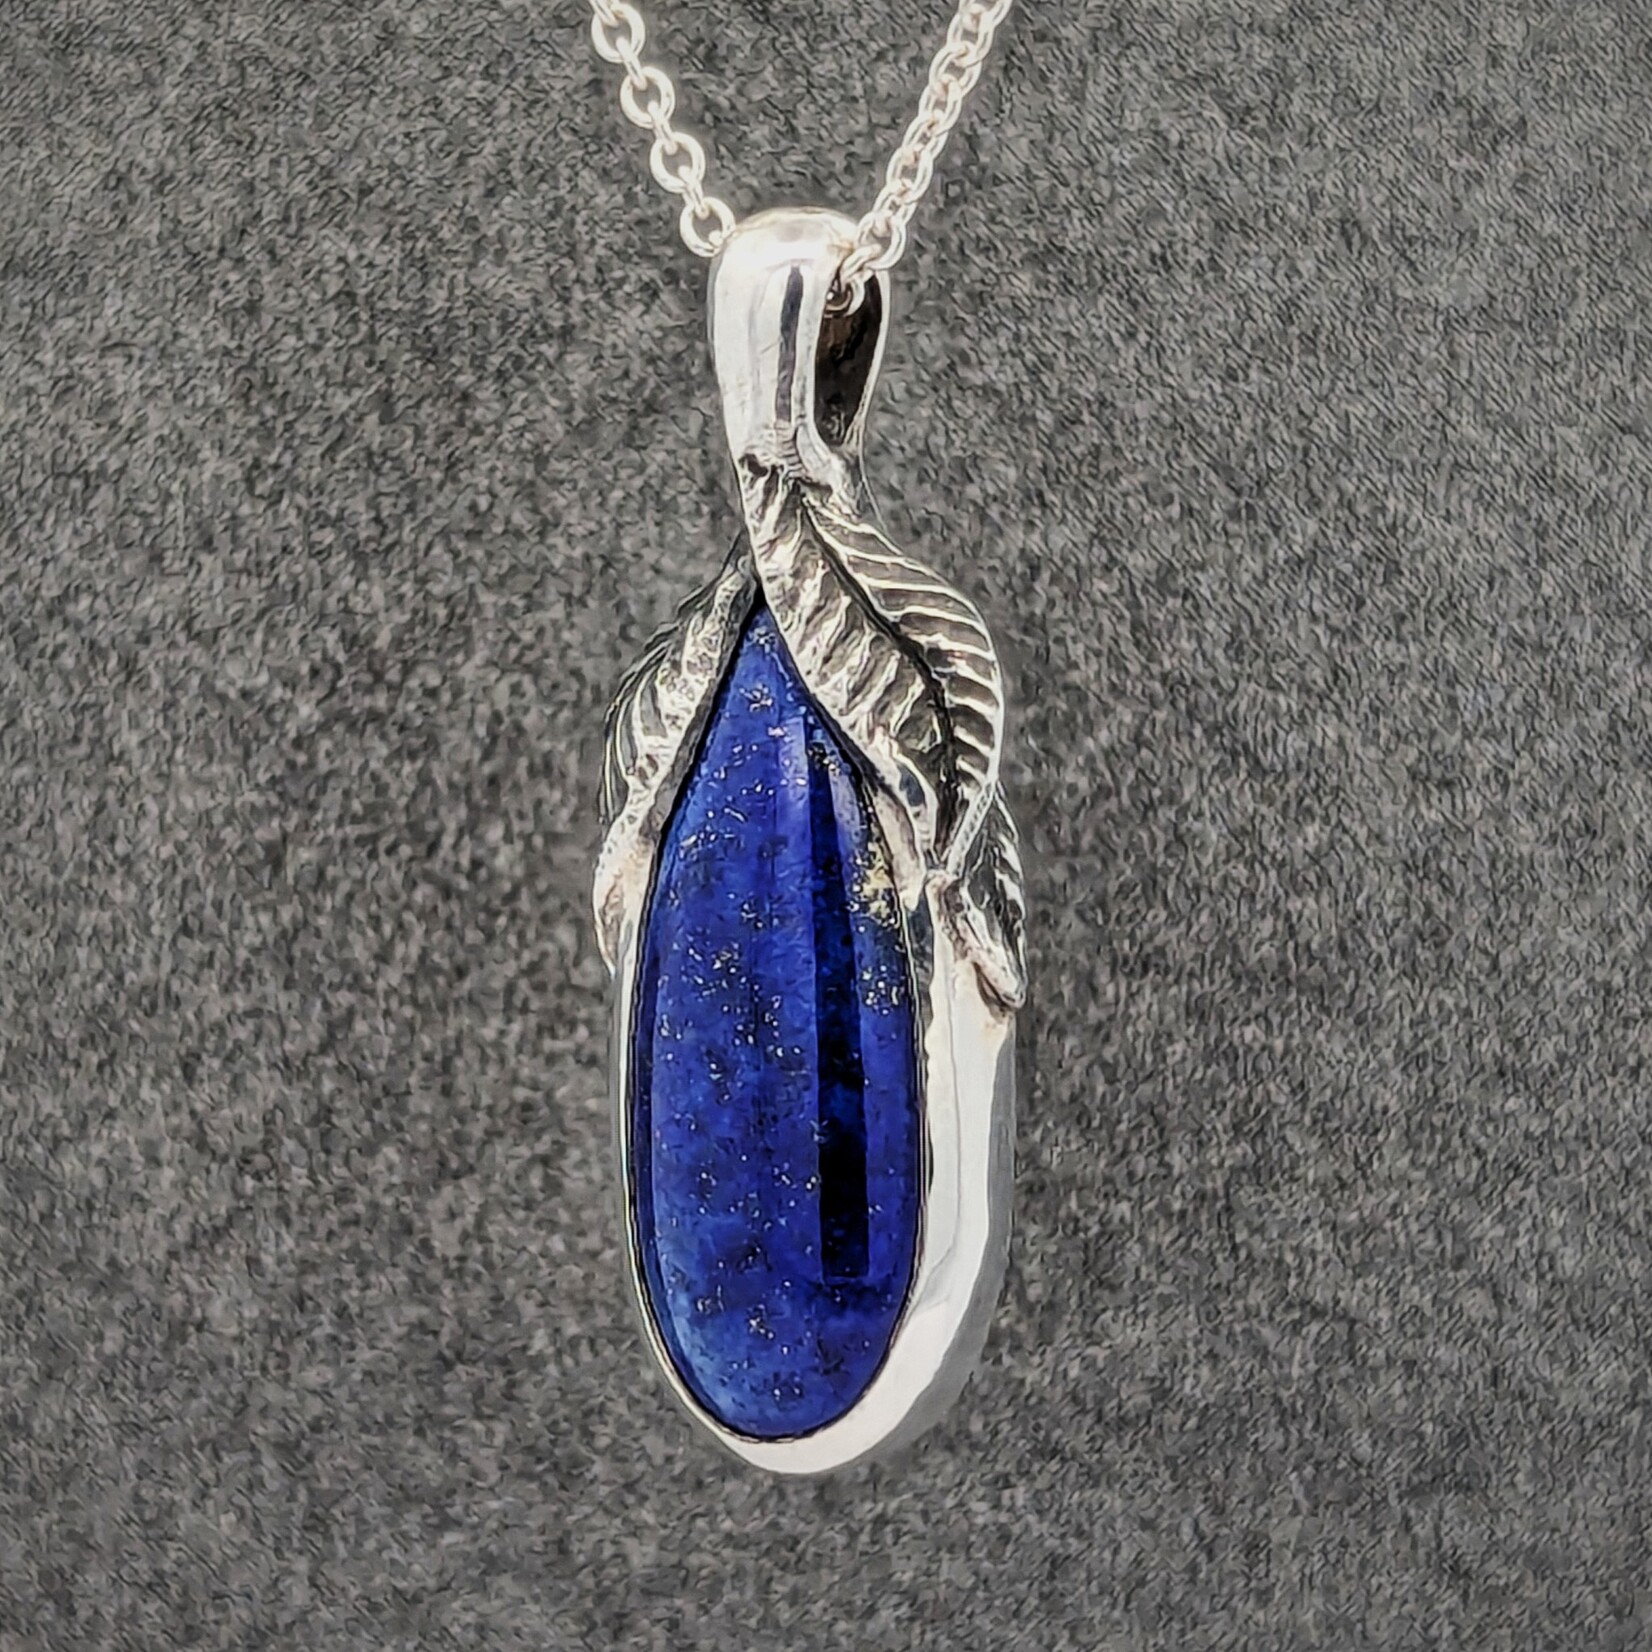 Carrie Nunes Jewelry Carved Leaves Lapis Drop Pendant